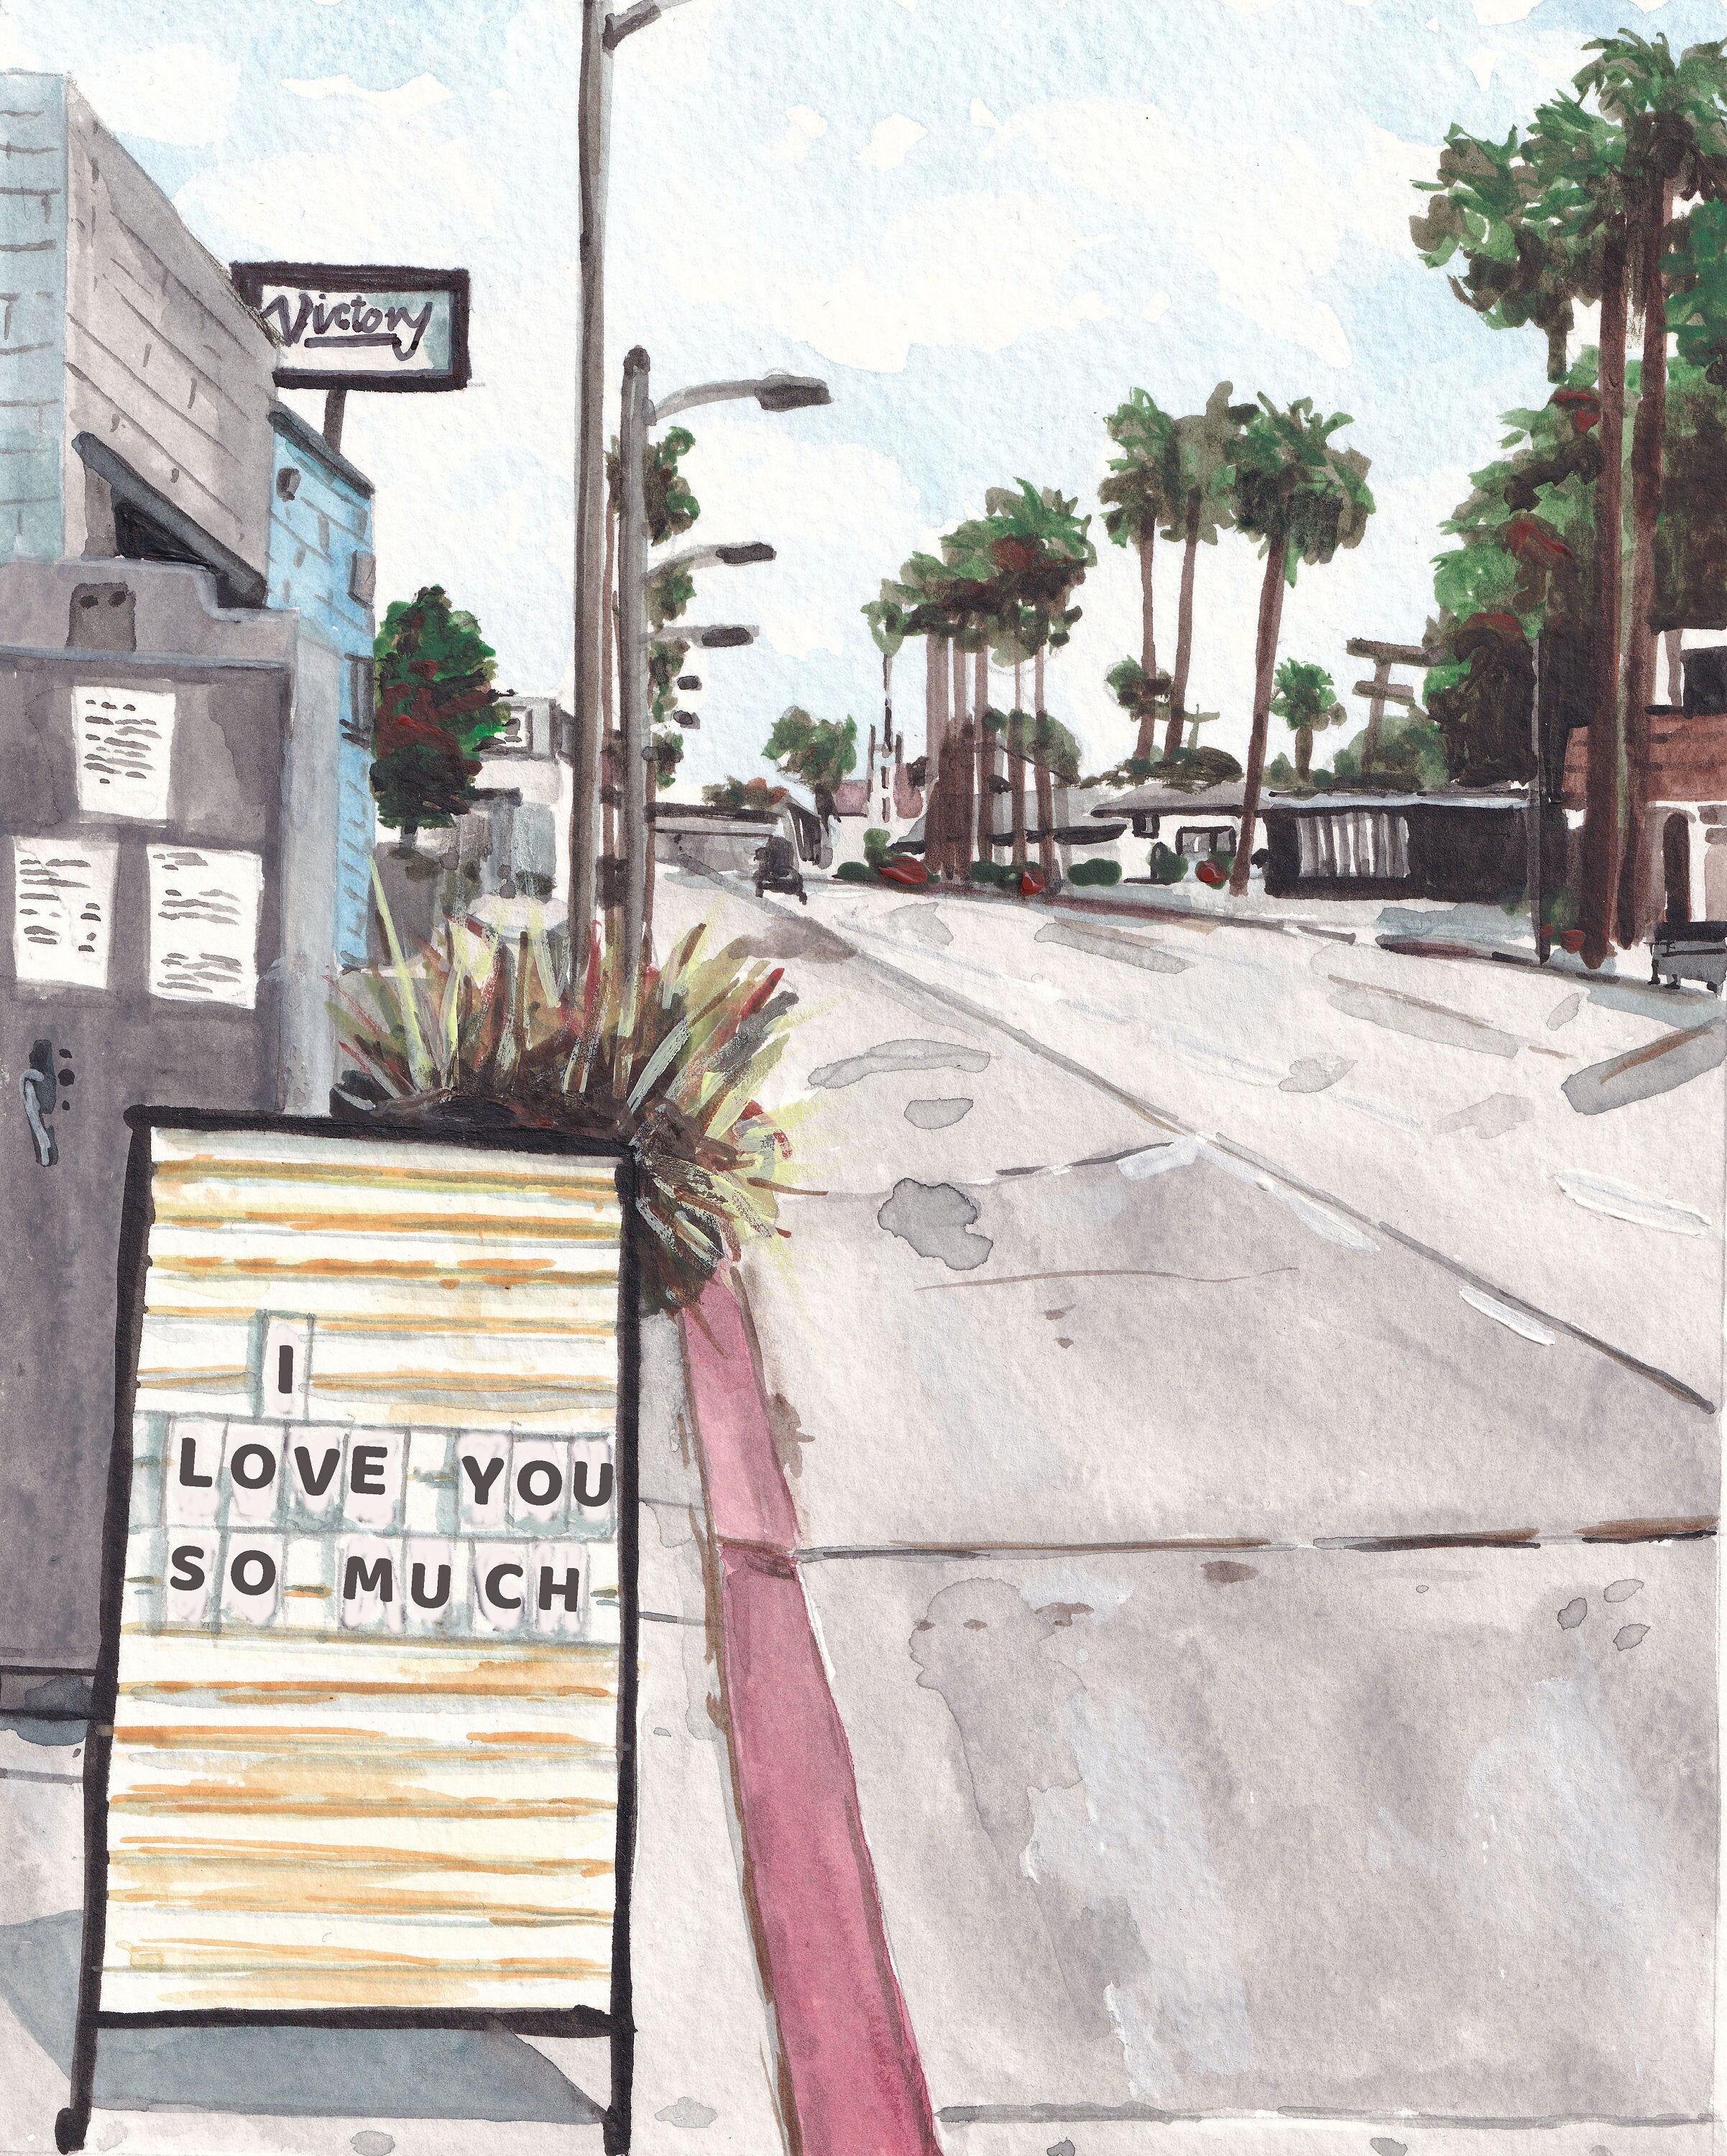 Los Angeles Streetscape - I Love You Sign print of painting by Medjool Studio. Print of original gouache painting of a Los Angeles streetscape, with palm trees, iconic buildings and an "I Love You" sign. 